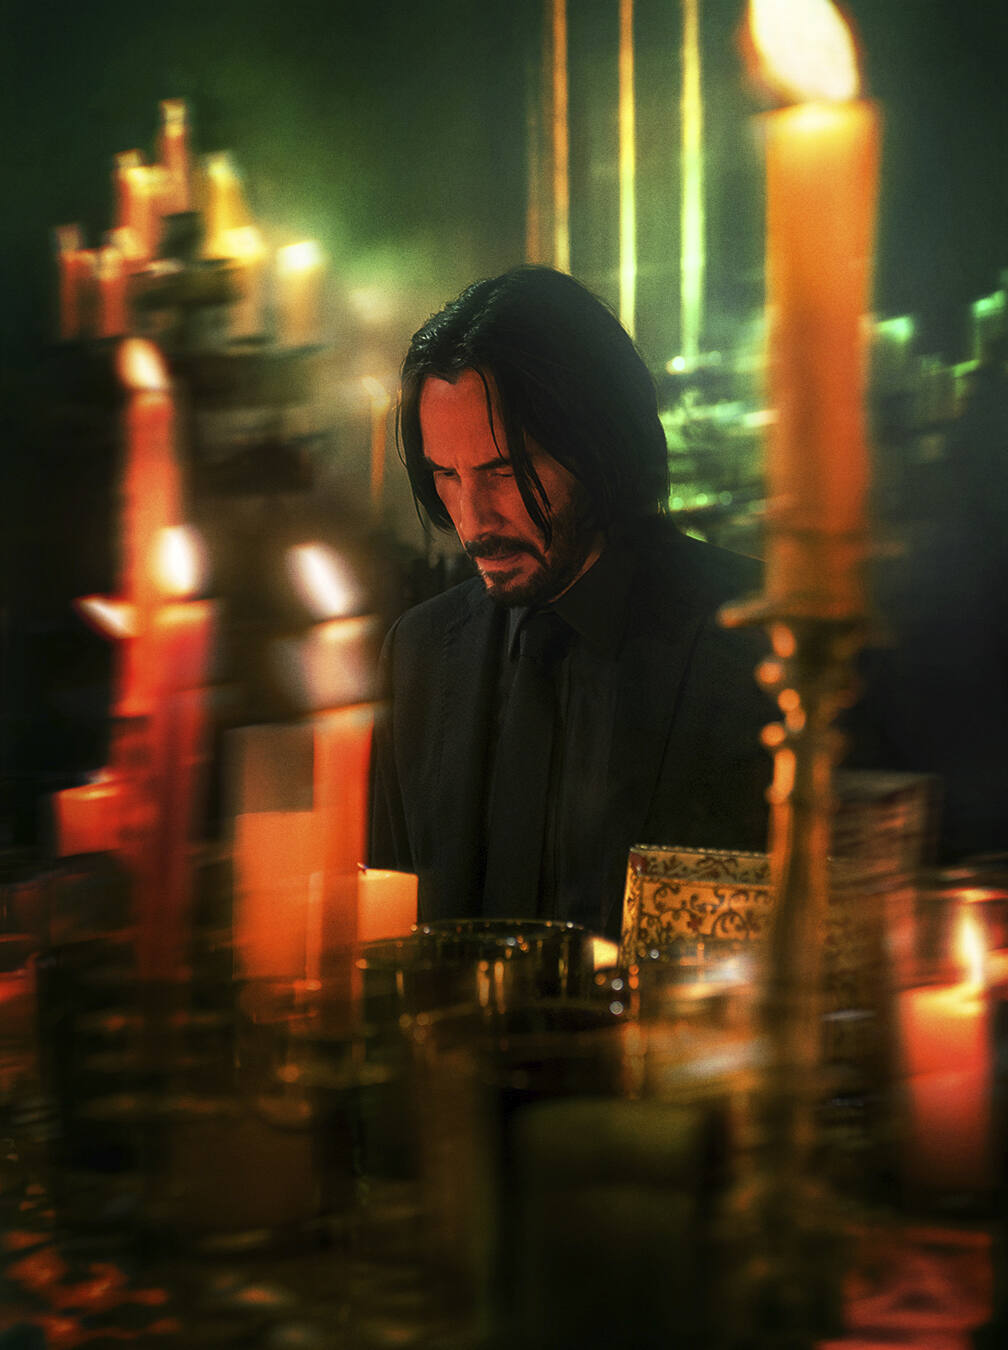 John Wick Chapter 4 Trailer: Keanu Reeves is a man of few words but lot of  action, WATCH